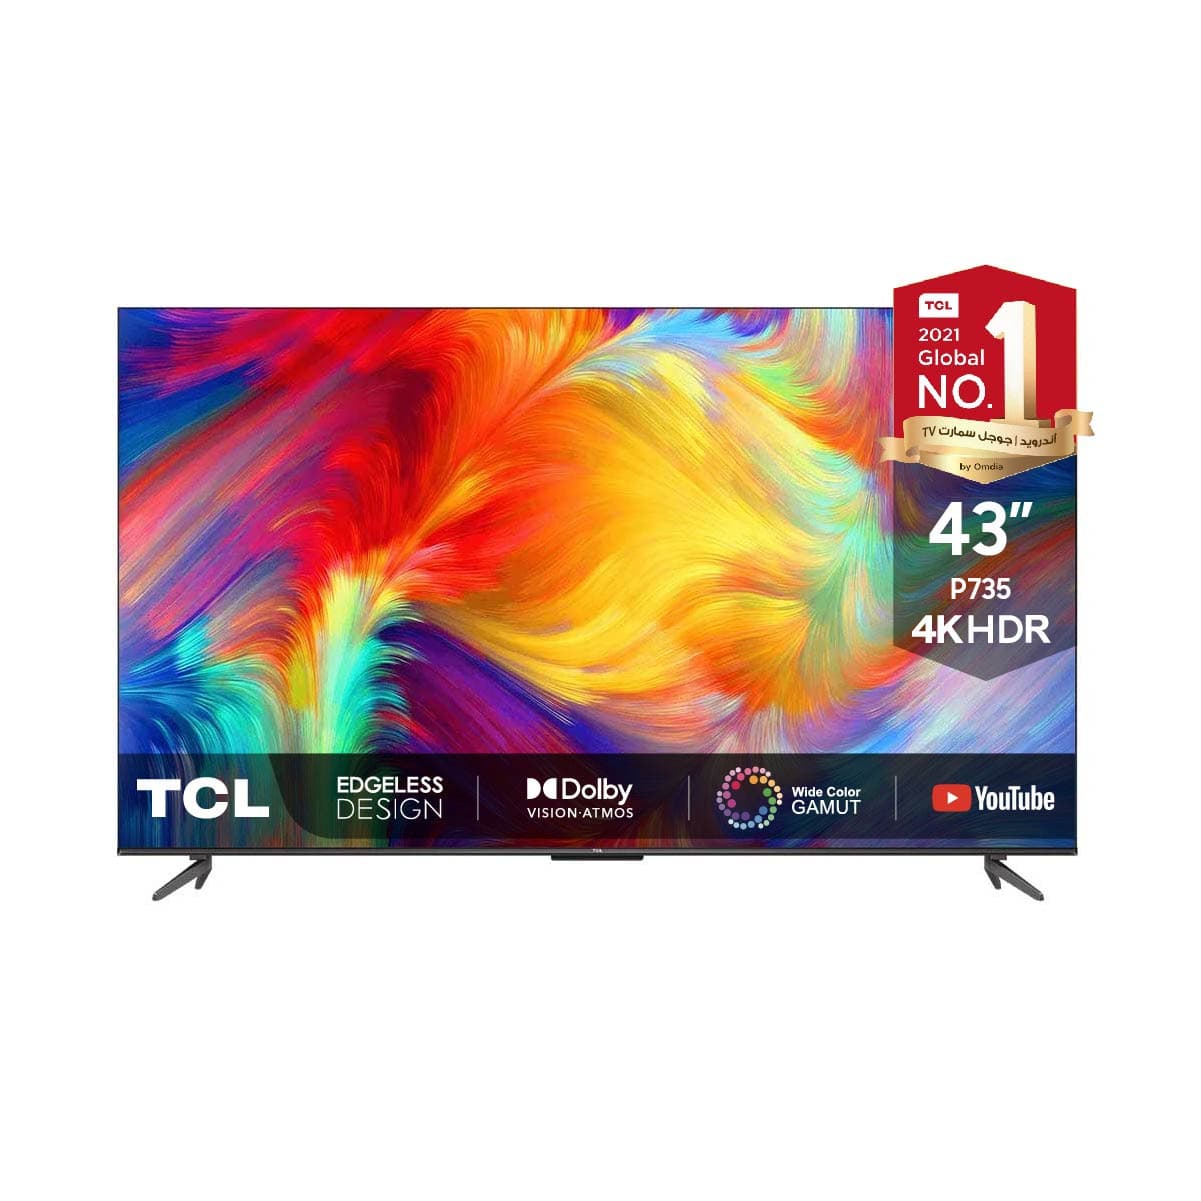 TCL P735 4K UHD Google TV With Dolby Atmos, 43 Inch